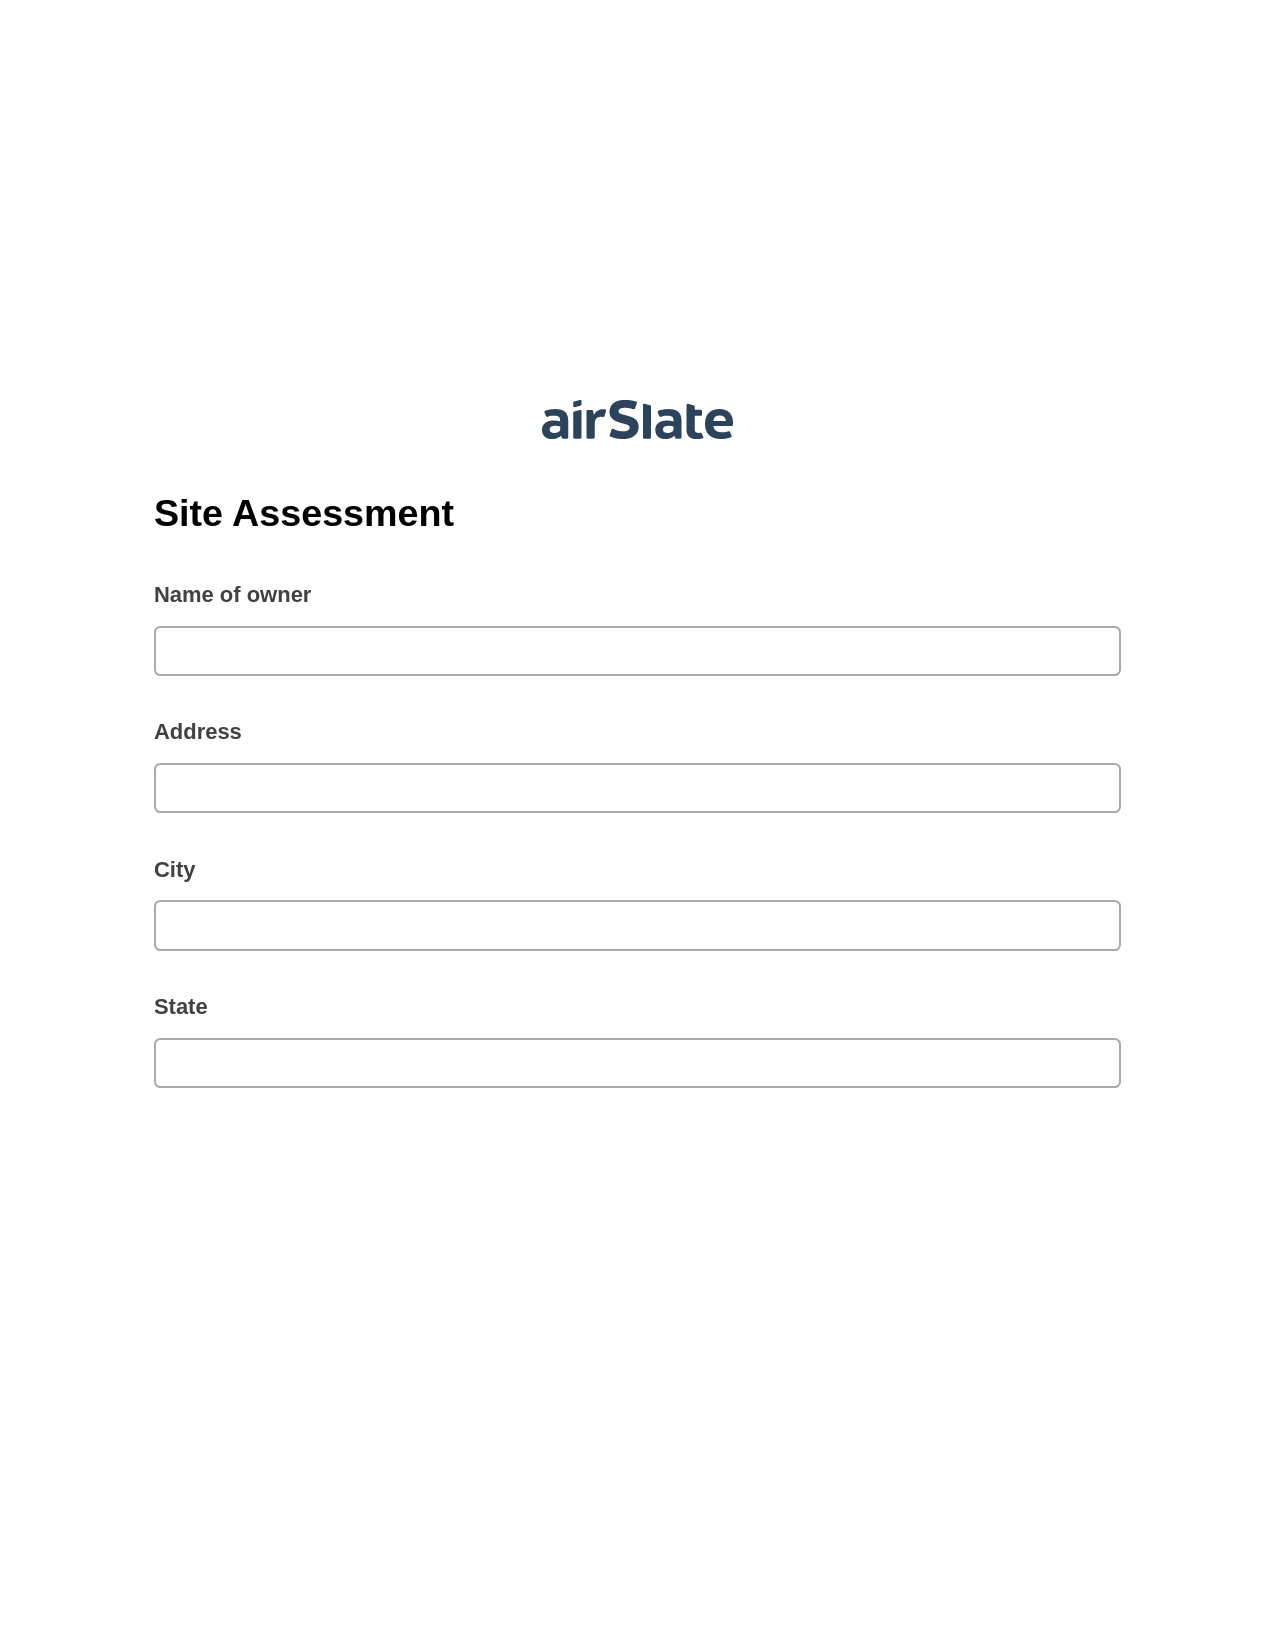 Multirole Site Assessment Pre-fill from CSV File Dropdown Options Bot, Lock the slate bot, Text Message Notification Postfinish Bot